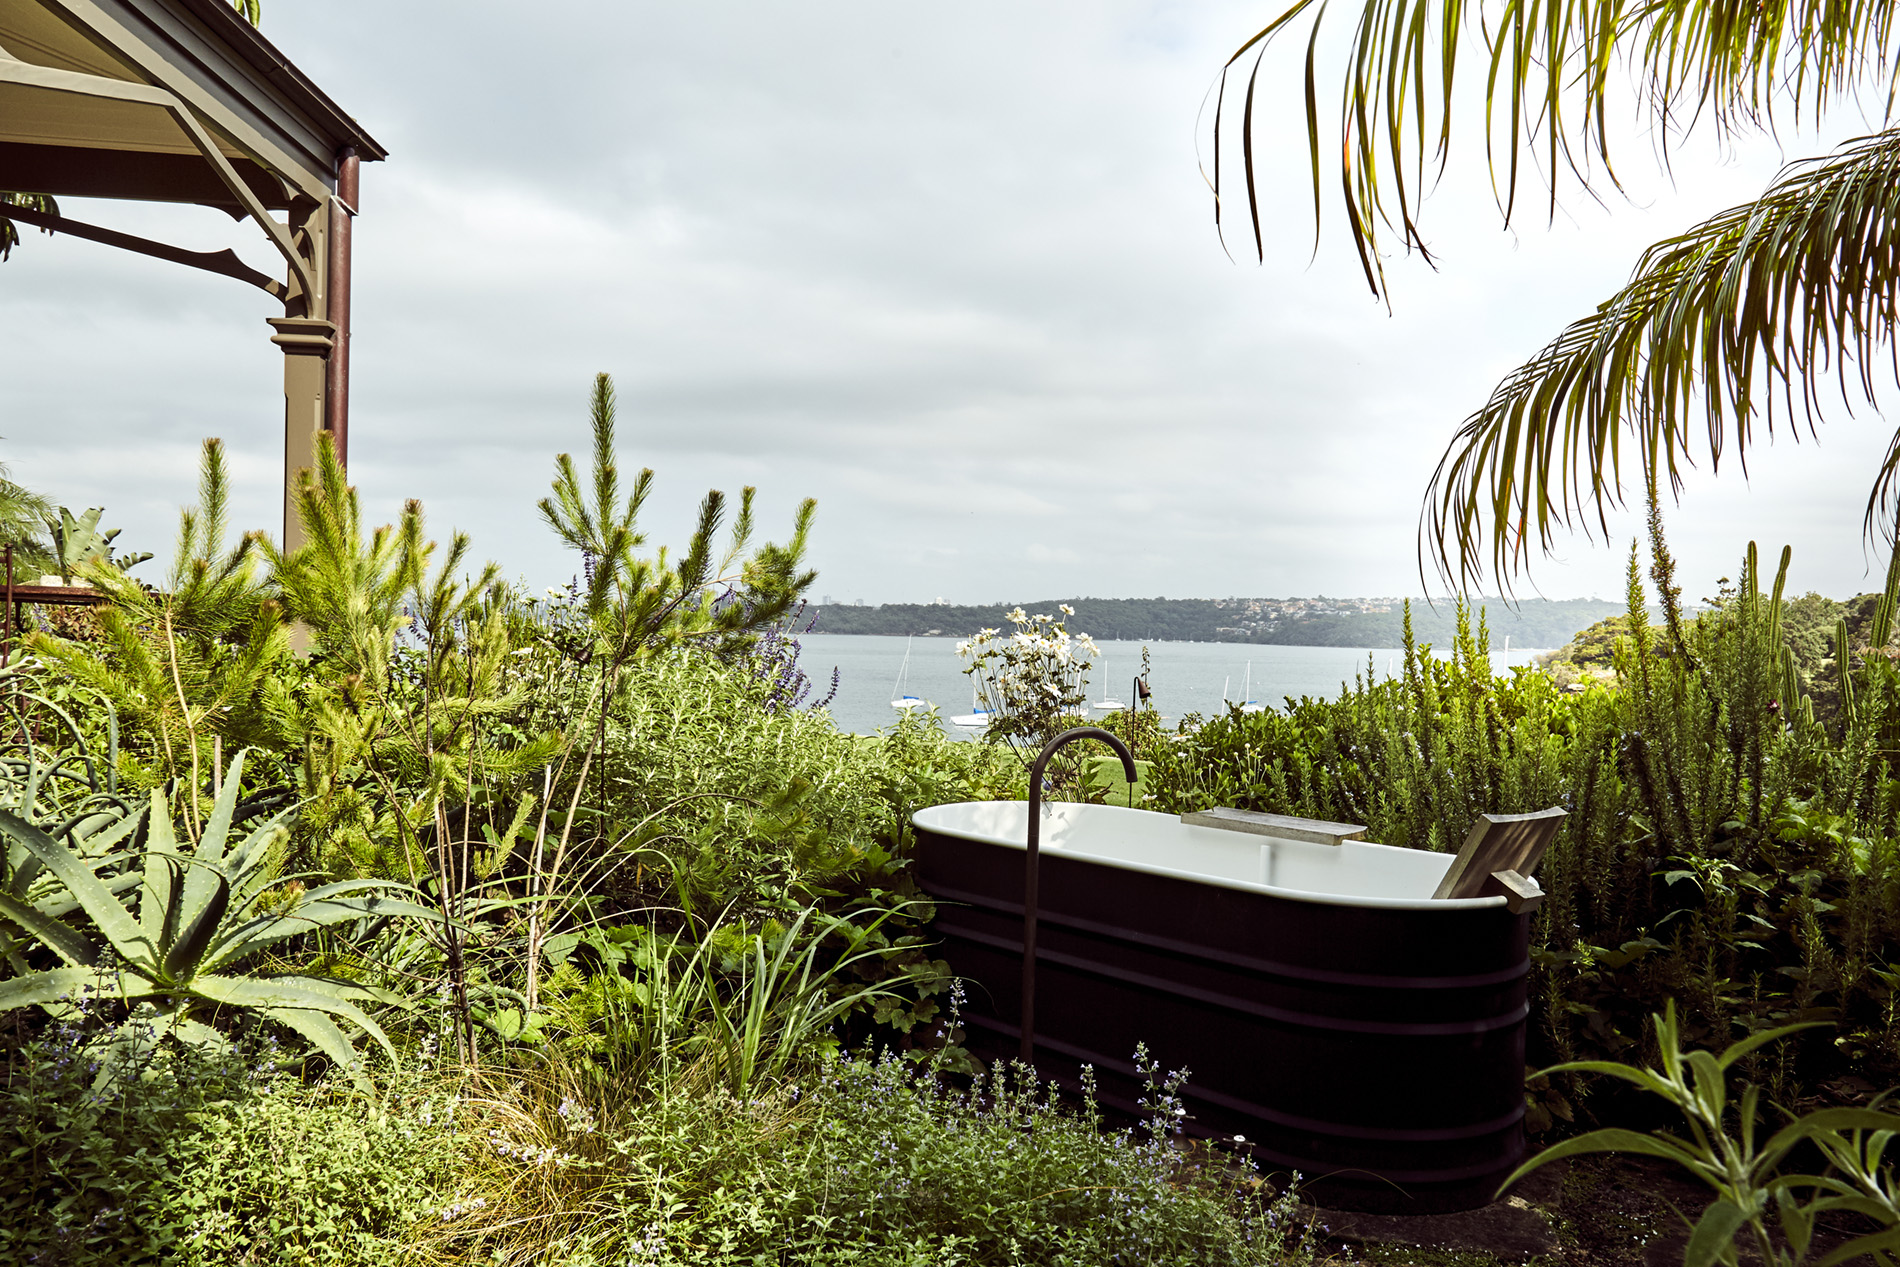 A photograph of a bathtub sitting in a garden, surrounded by plants and grasses. The ocean can be seen beyond the garden and the edge of a house sits in the left of the image.